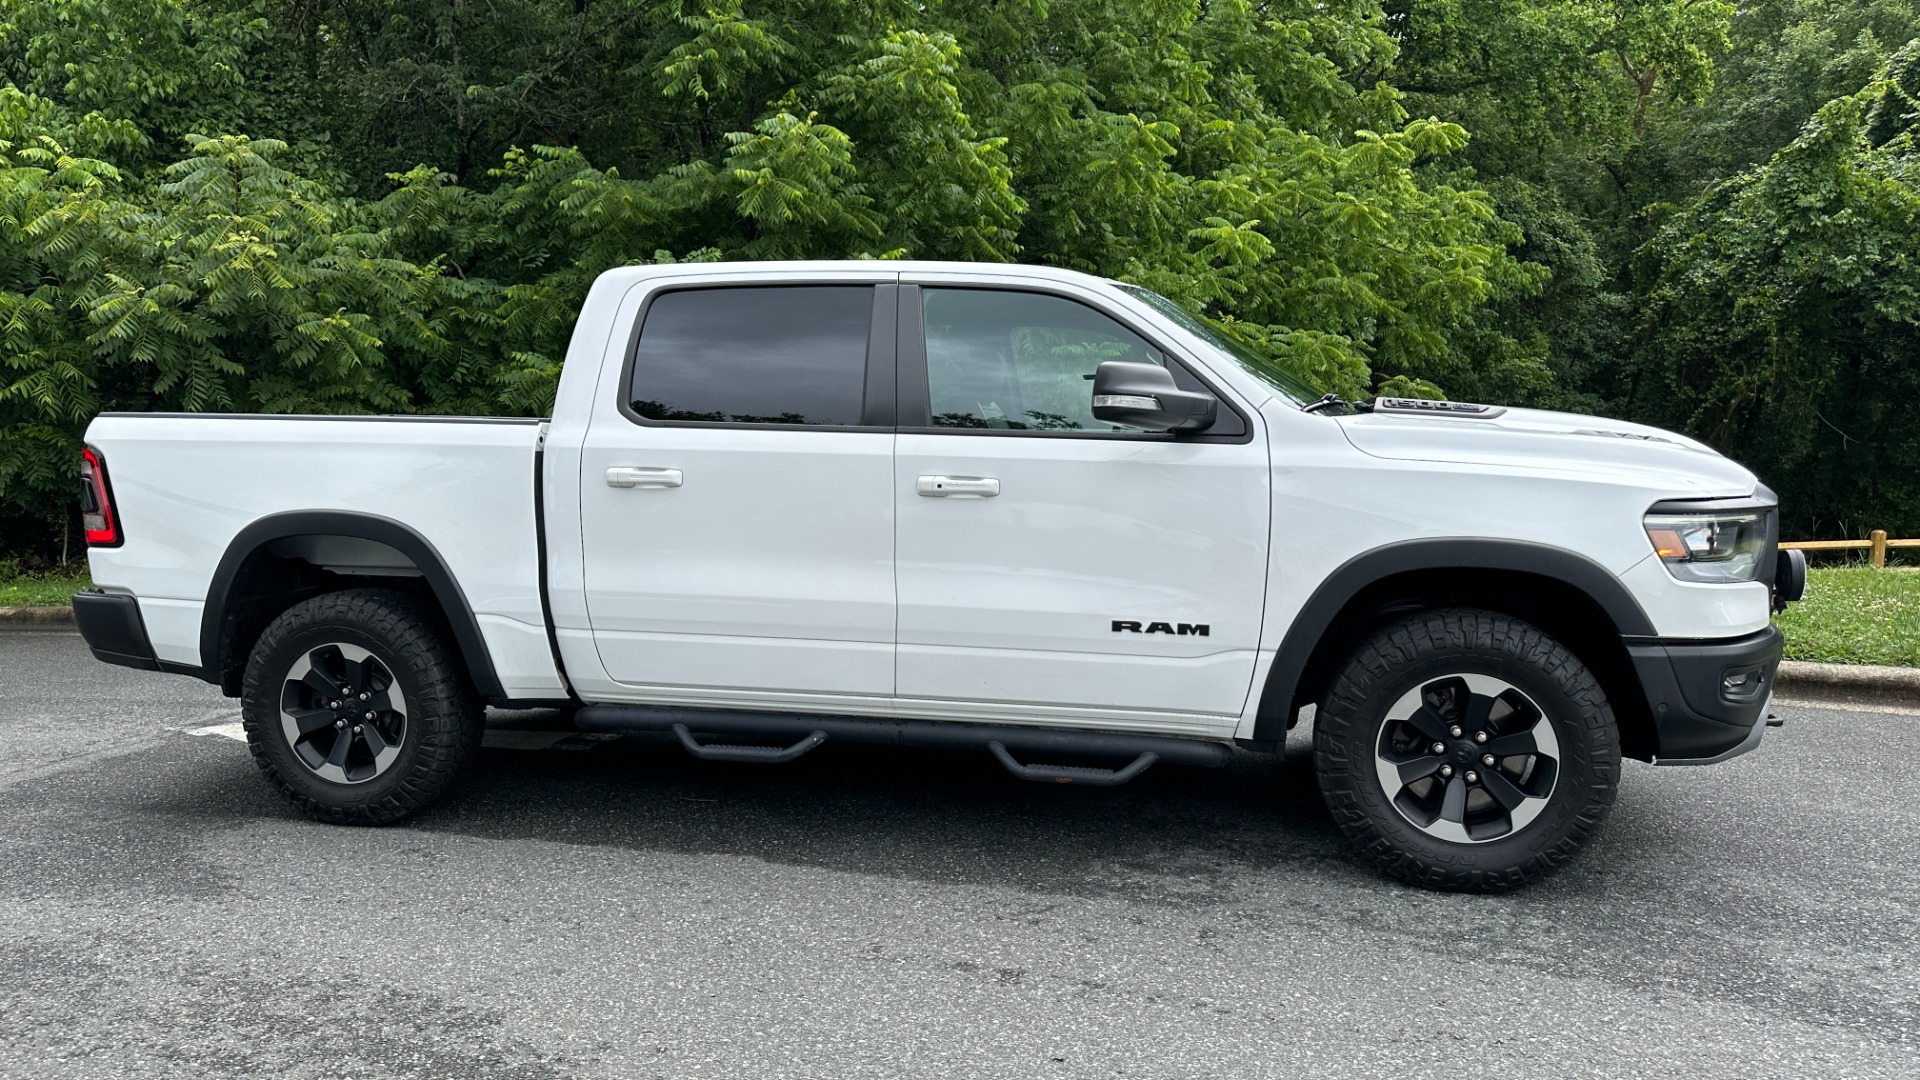 Used 2019 Ram 1500 REBEL / KC LIGHTS / BORLA EXHUAST / ALPINE / TOUCH SCREEN for sale $36,995 at Formula Imports in Charlotte NC 28227 3